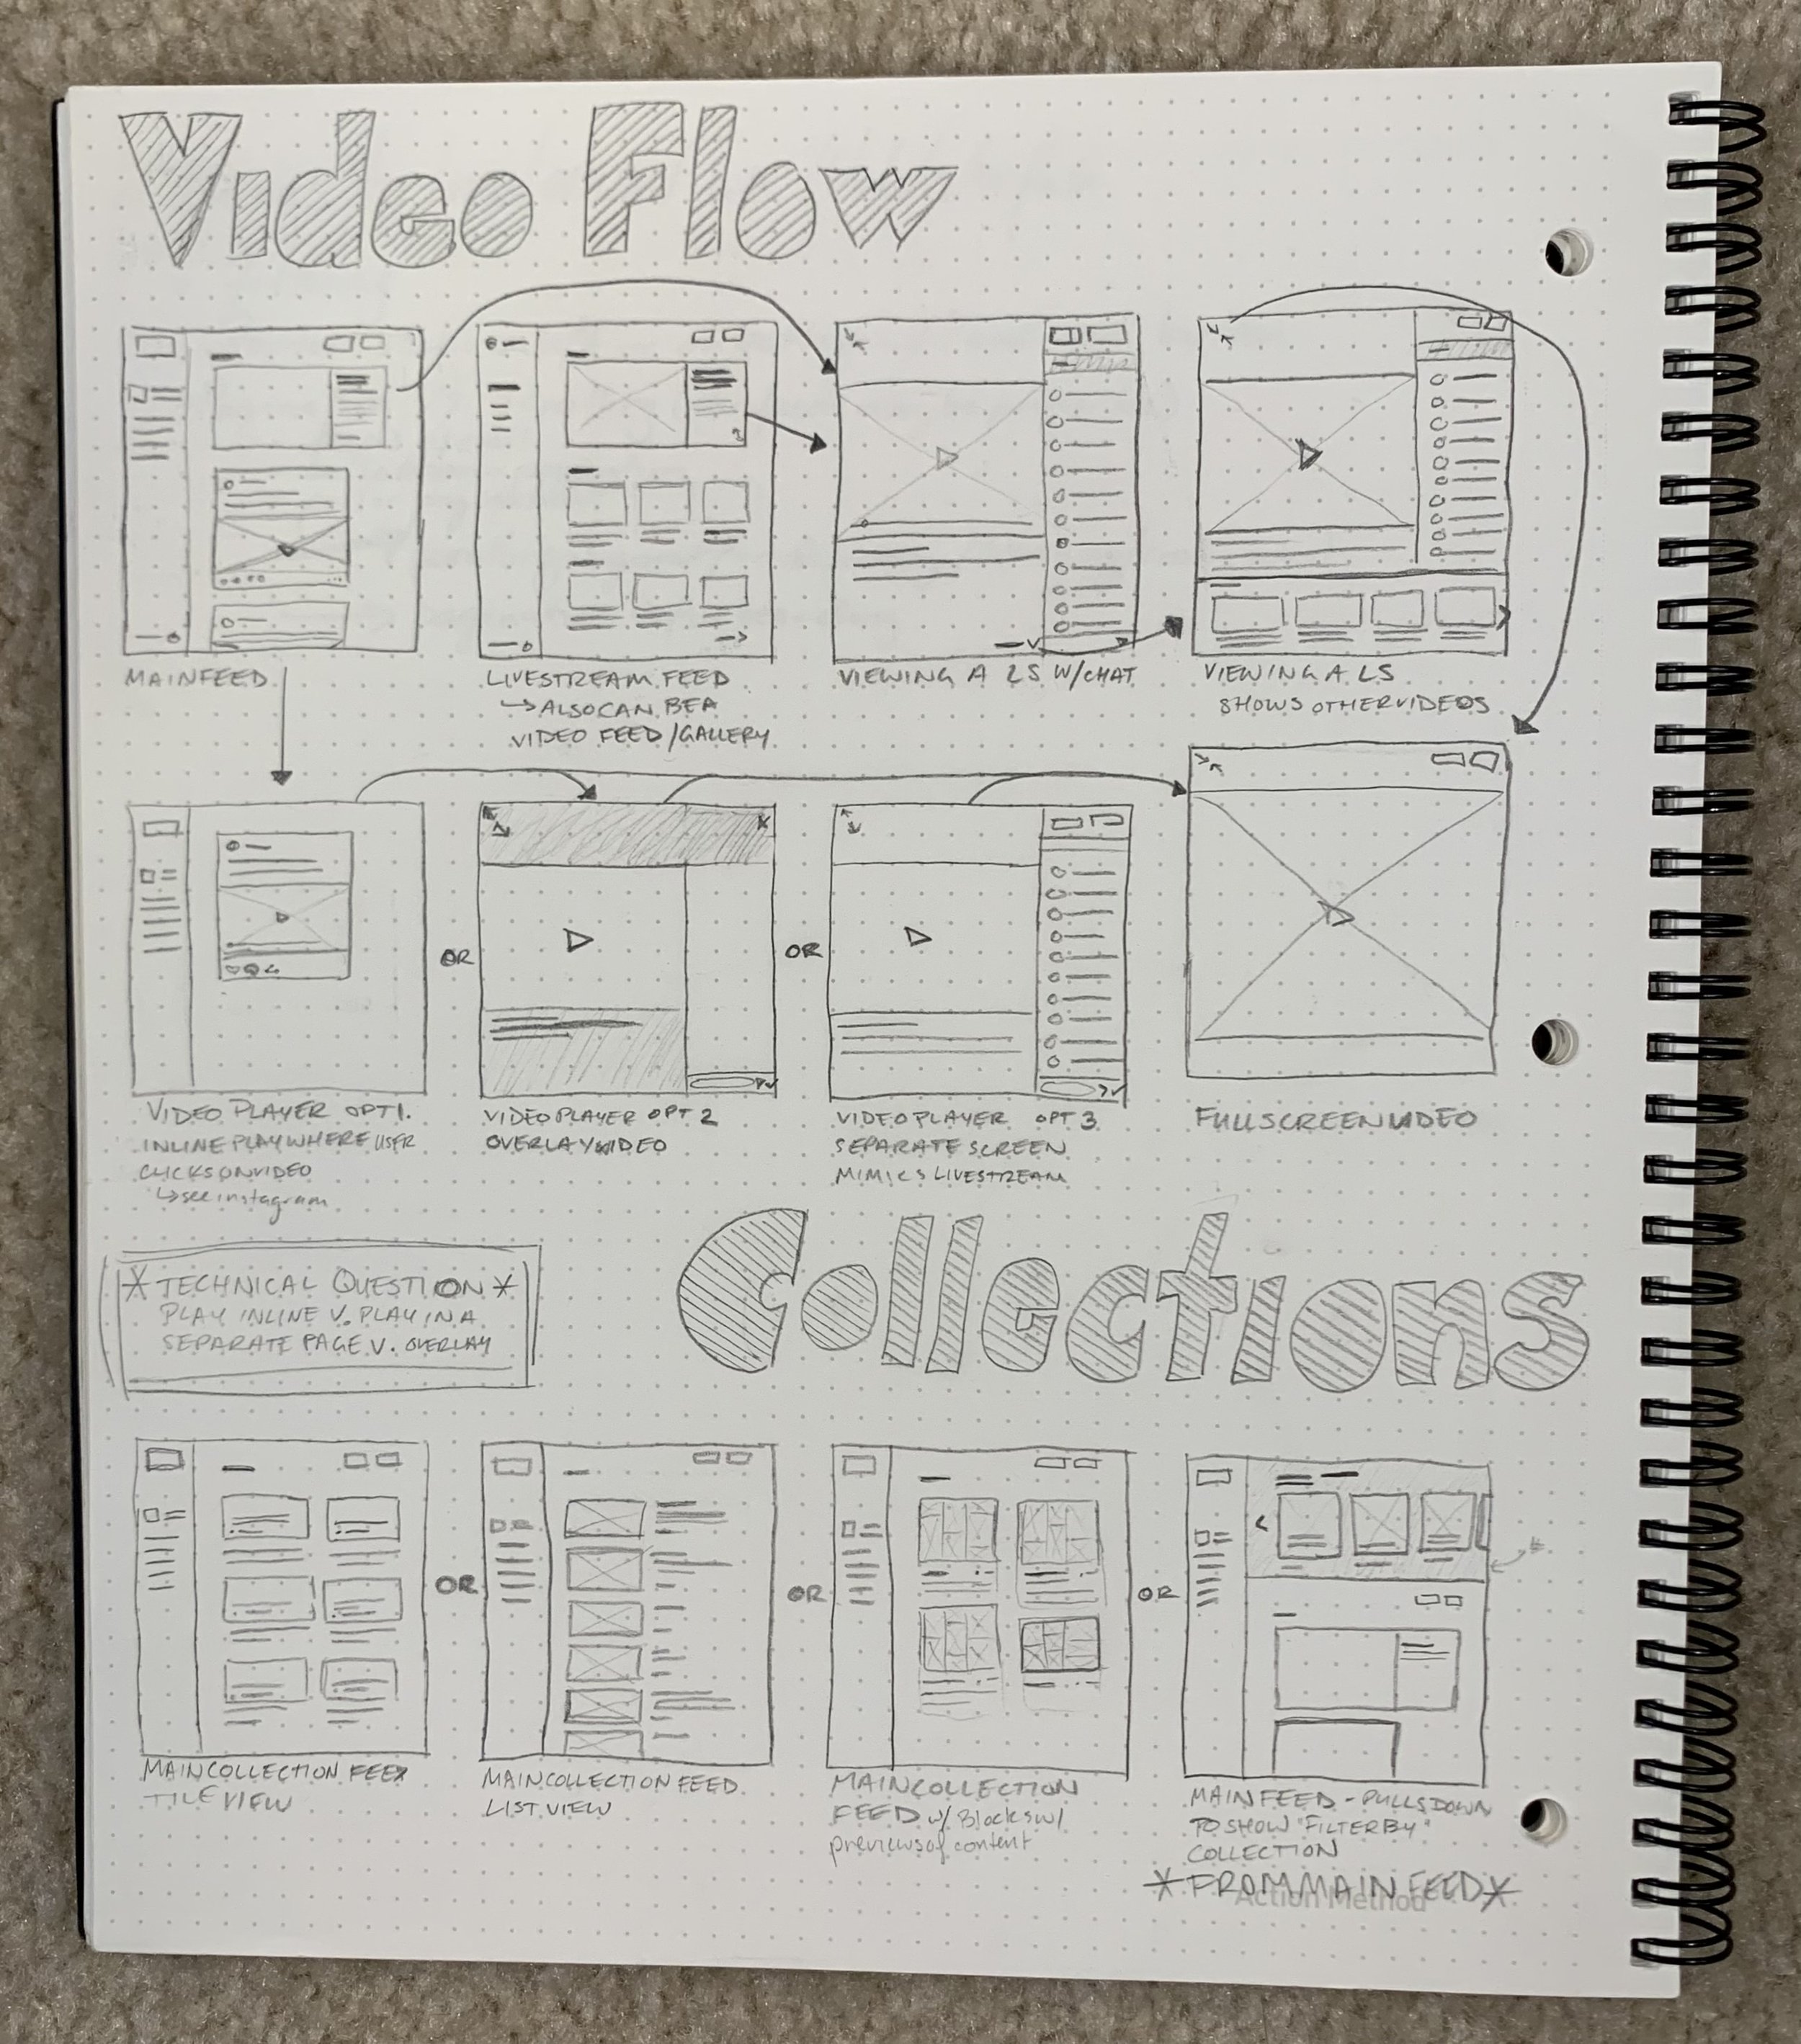 Video feed and collection userflow